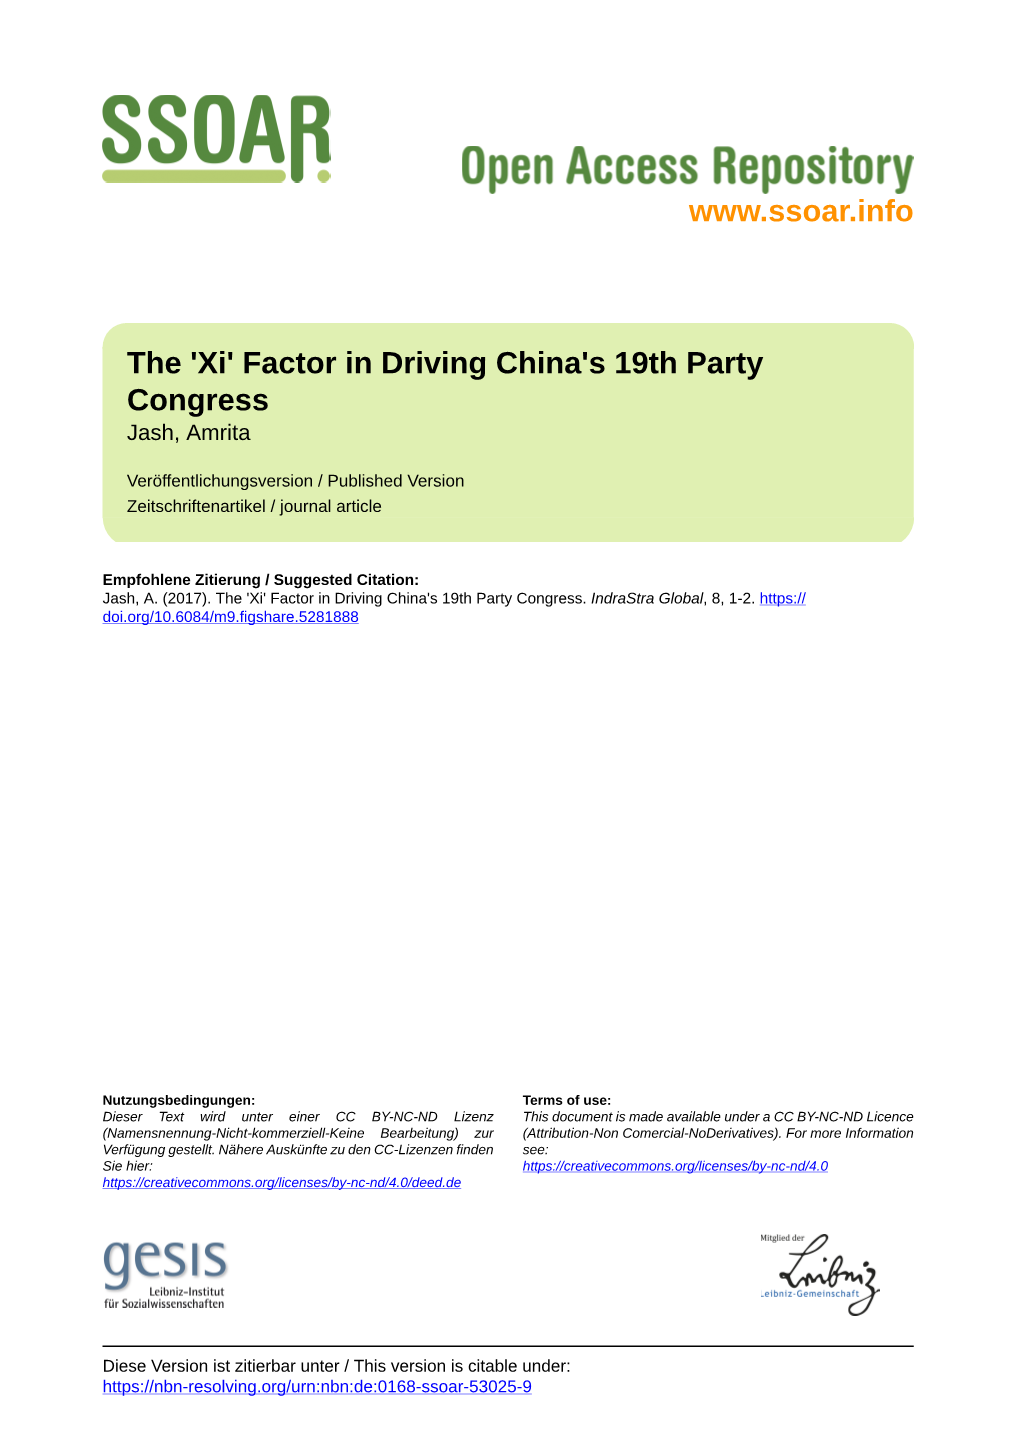 The "Xi" Factor in Driving China's 19Th Party Congress